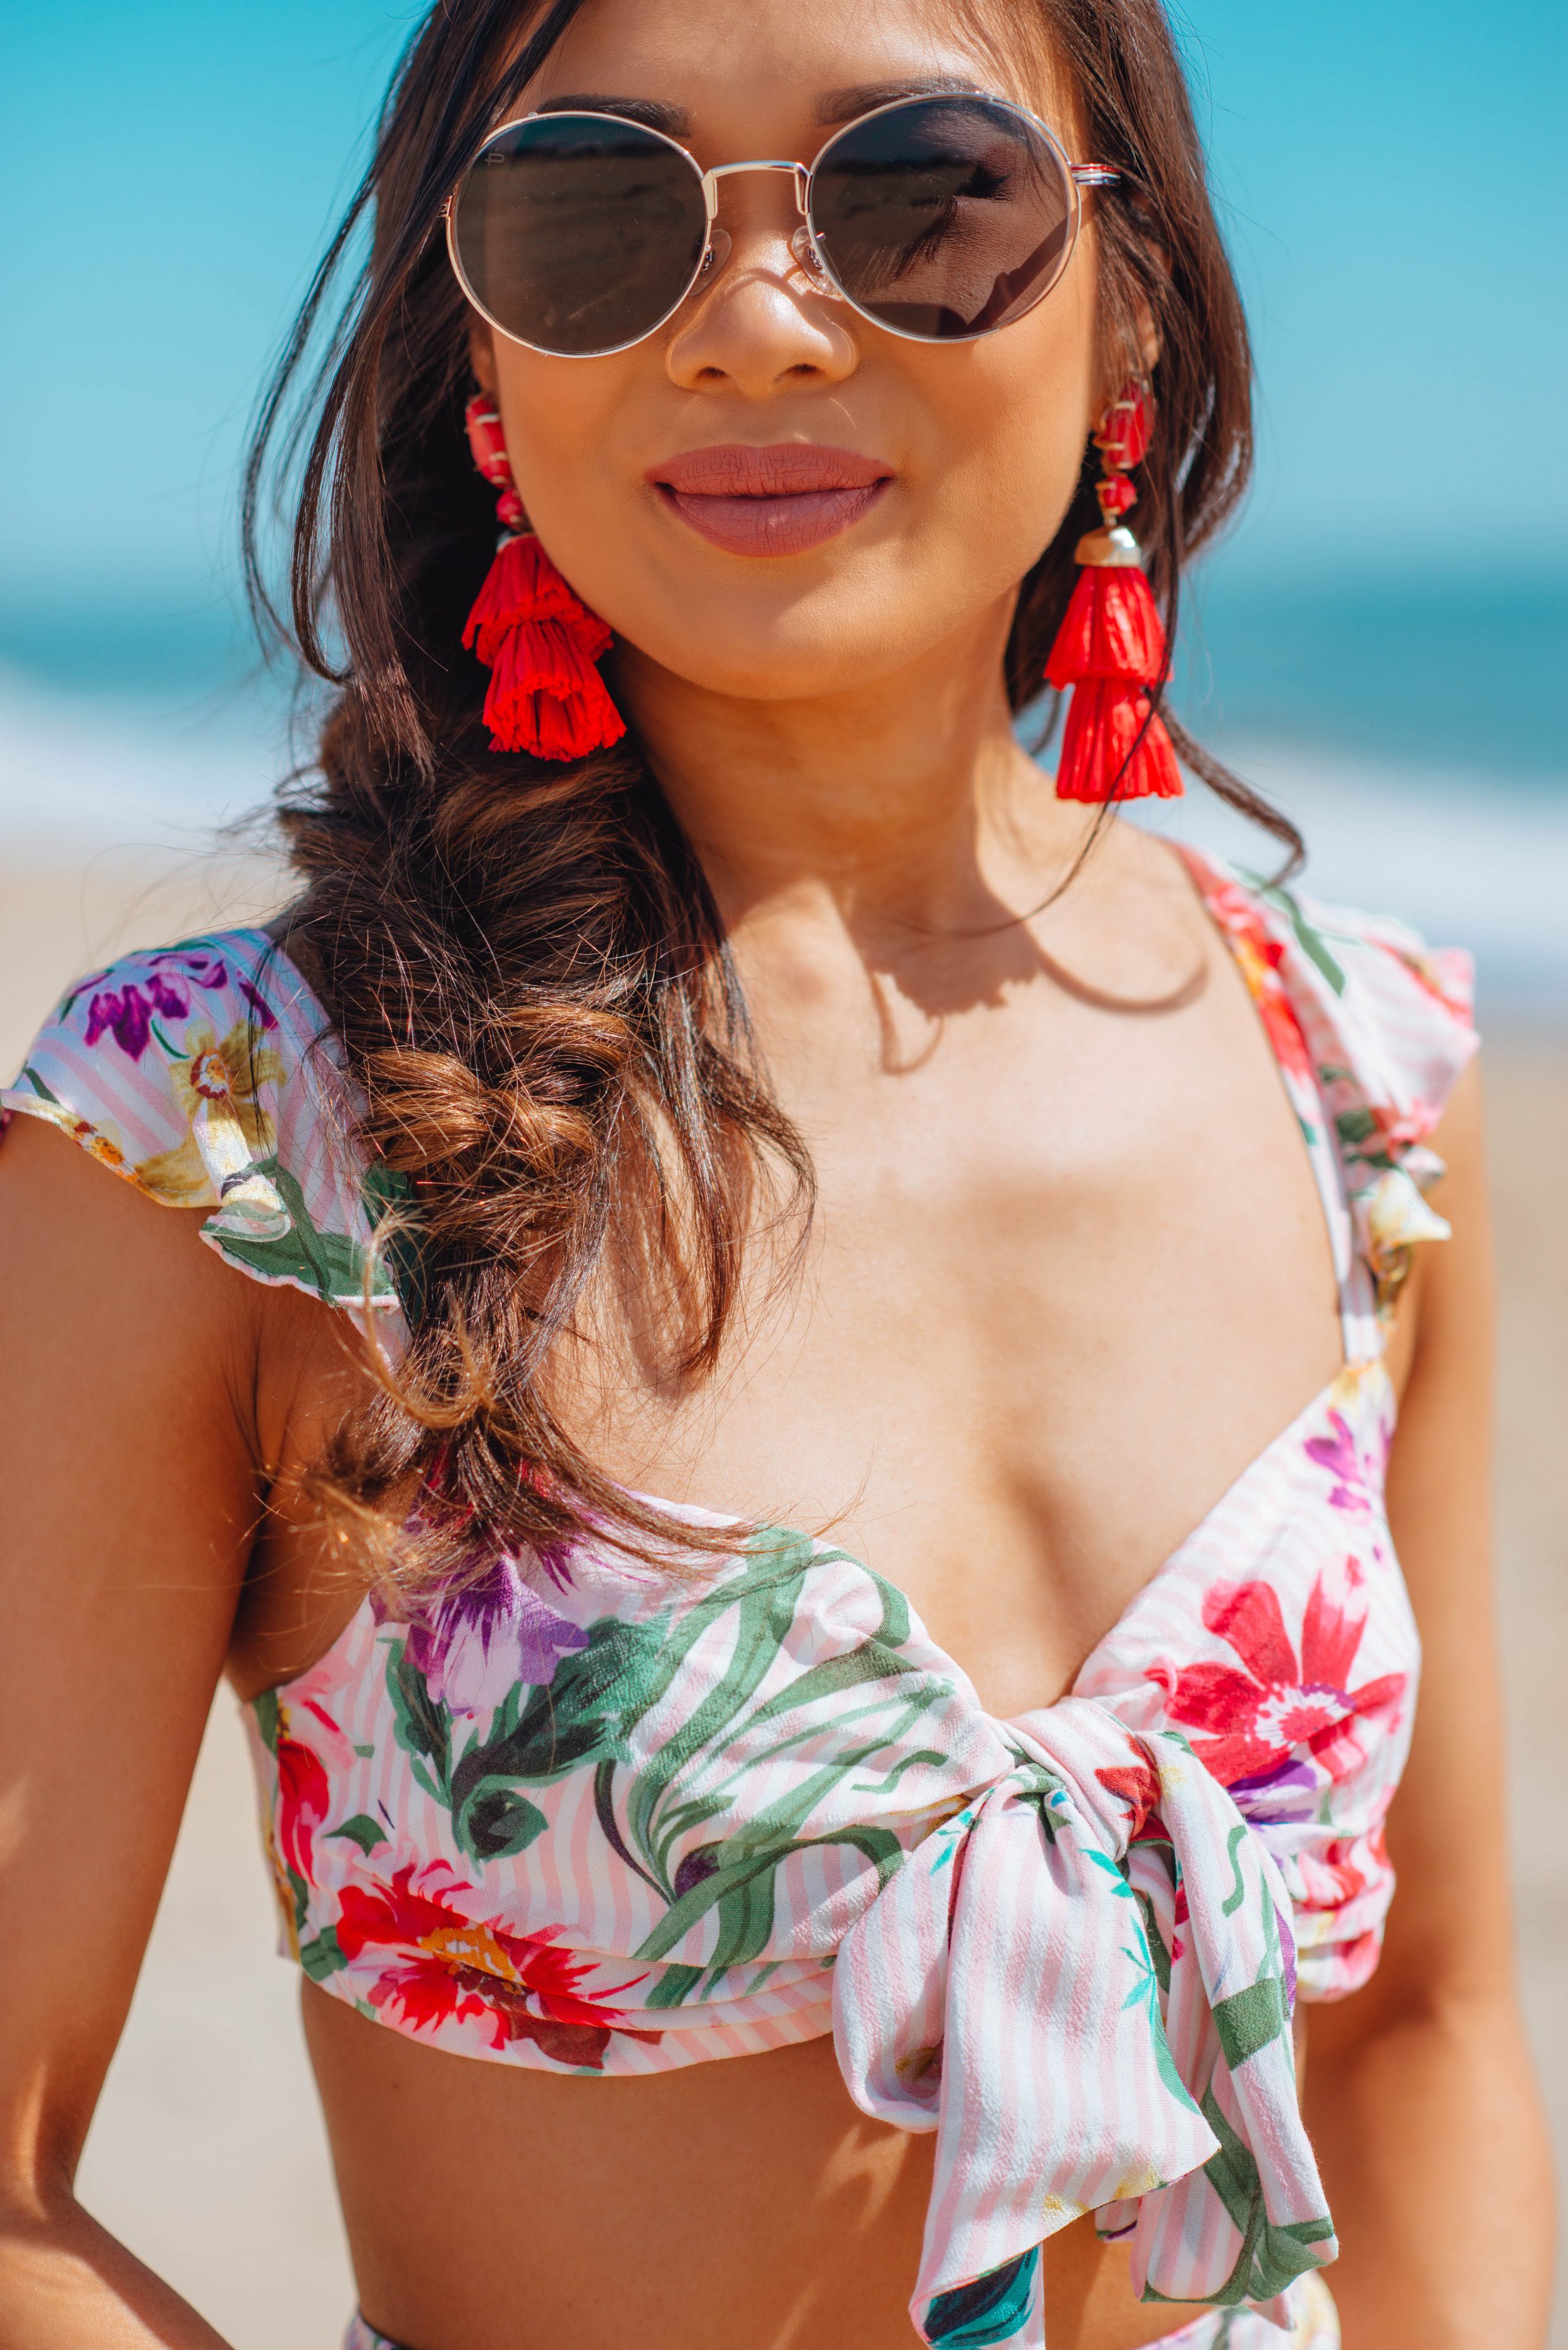 Blogger Hoang-Kim wears a floral two piece set with tassel earrings and a fishtail braid for the beach